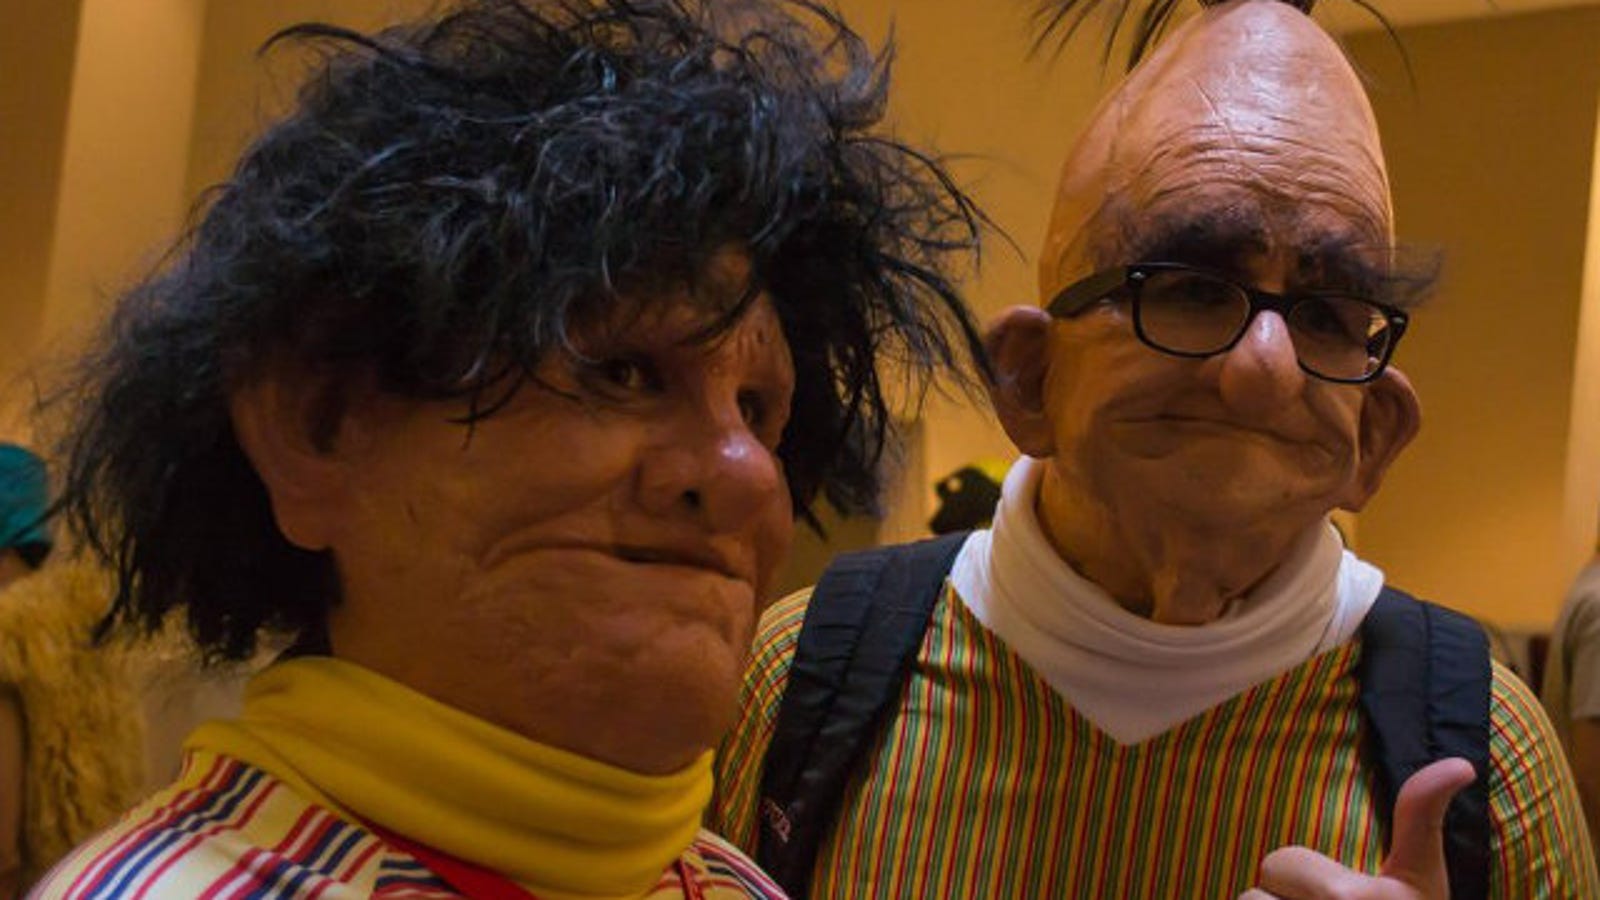 Can't stop screaming, real life Bert and Ernie cosplay is too terrifying